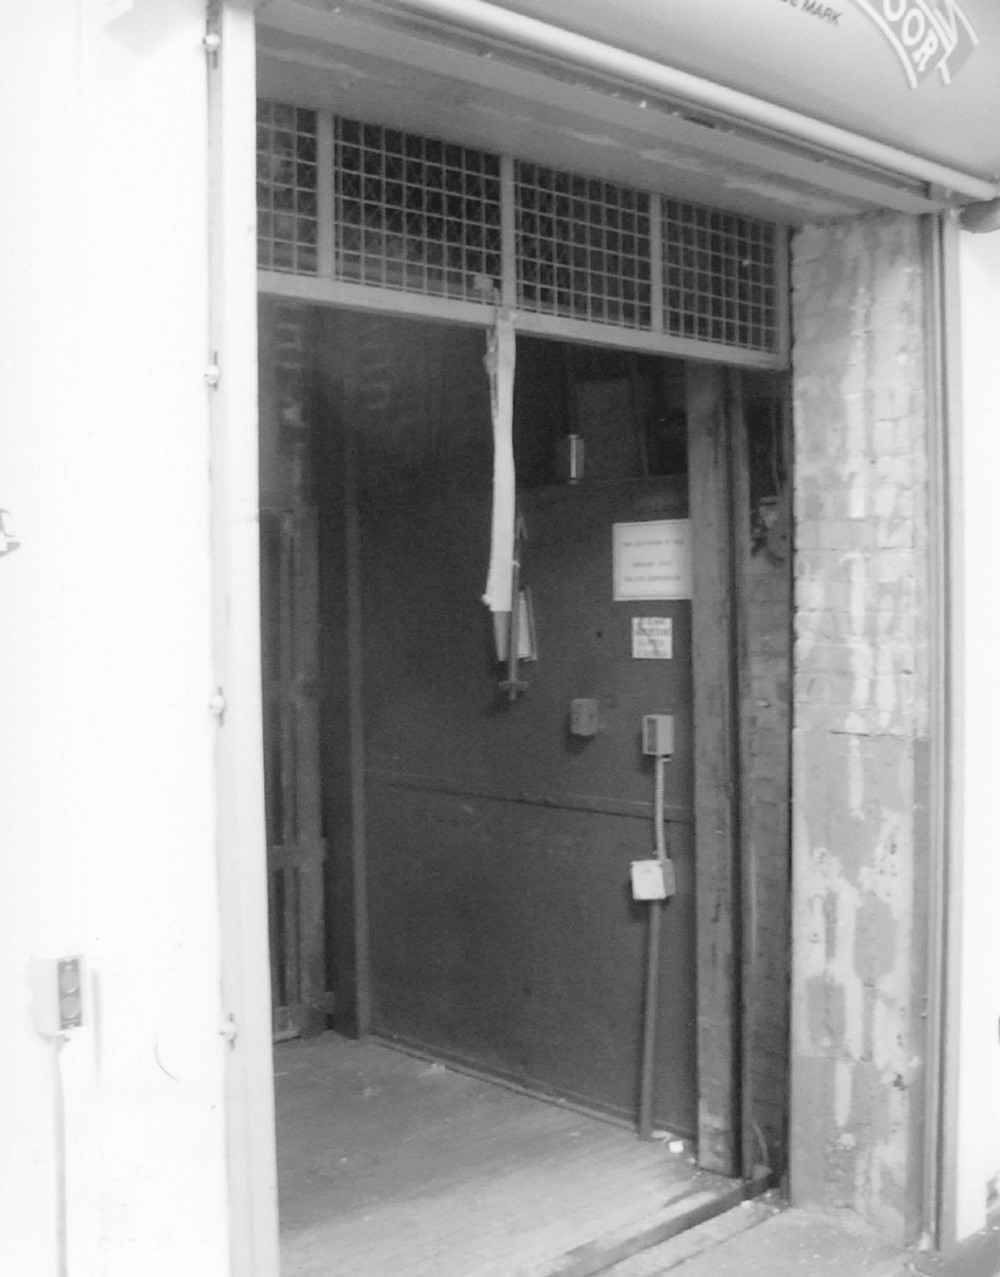 Marion County Telephone Company Building, Marion Ohio First floor, freight elevator (2006)